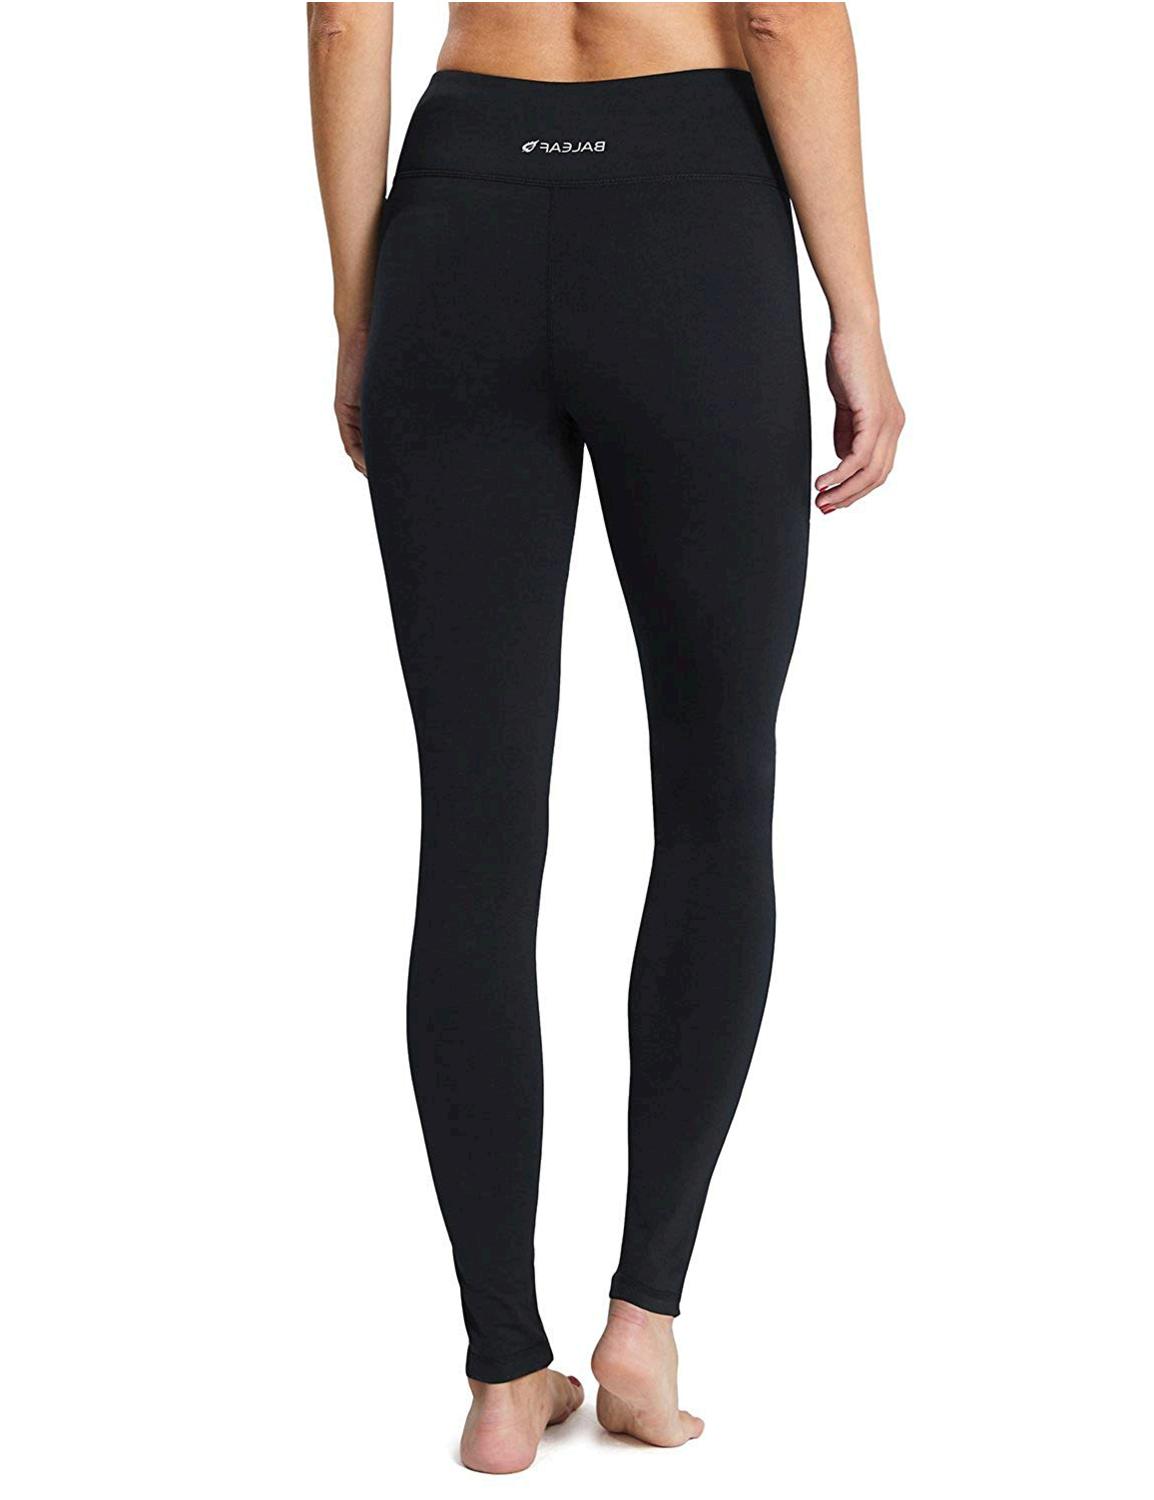 Black Pocketed Fleece Lined Leggings - Small to 3X